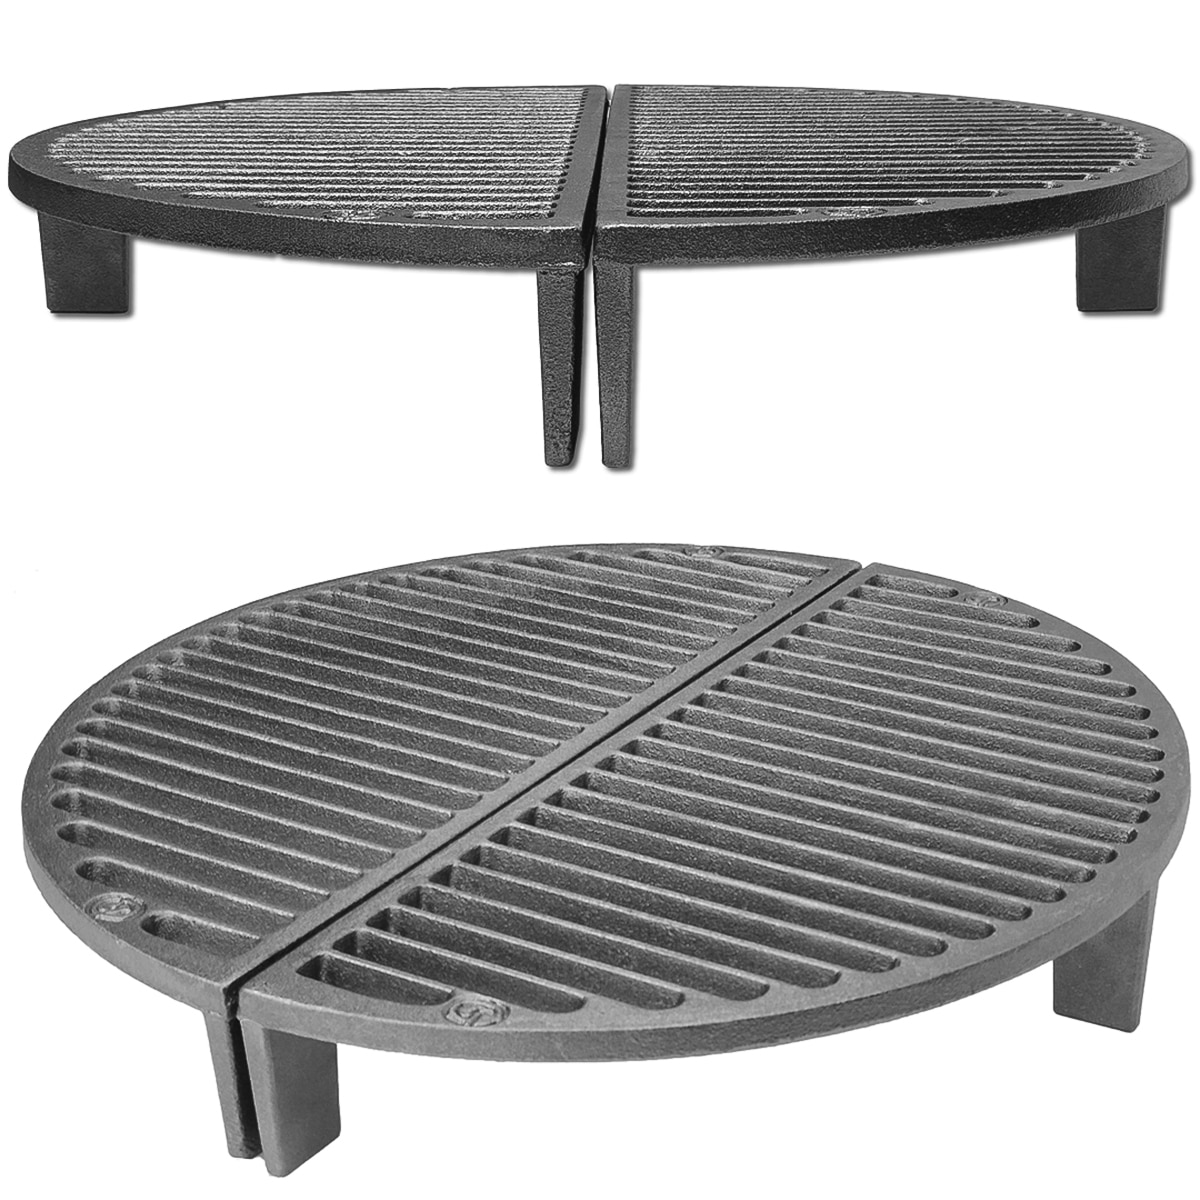 18" Cast Iron Half Grate for Ceramic Cookers